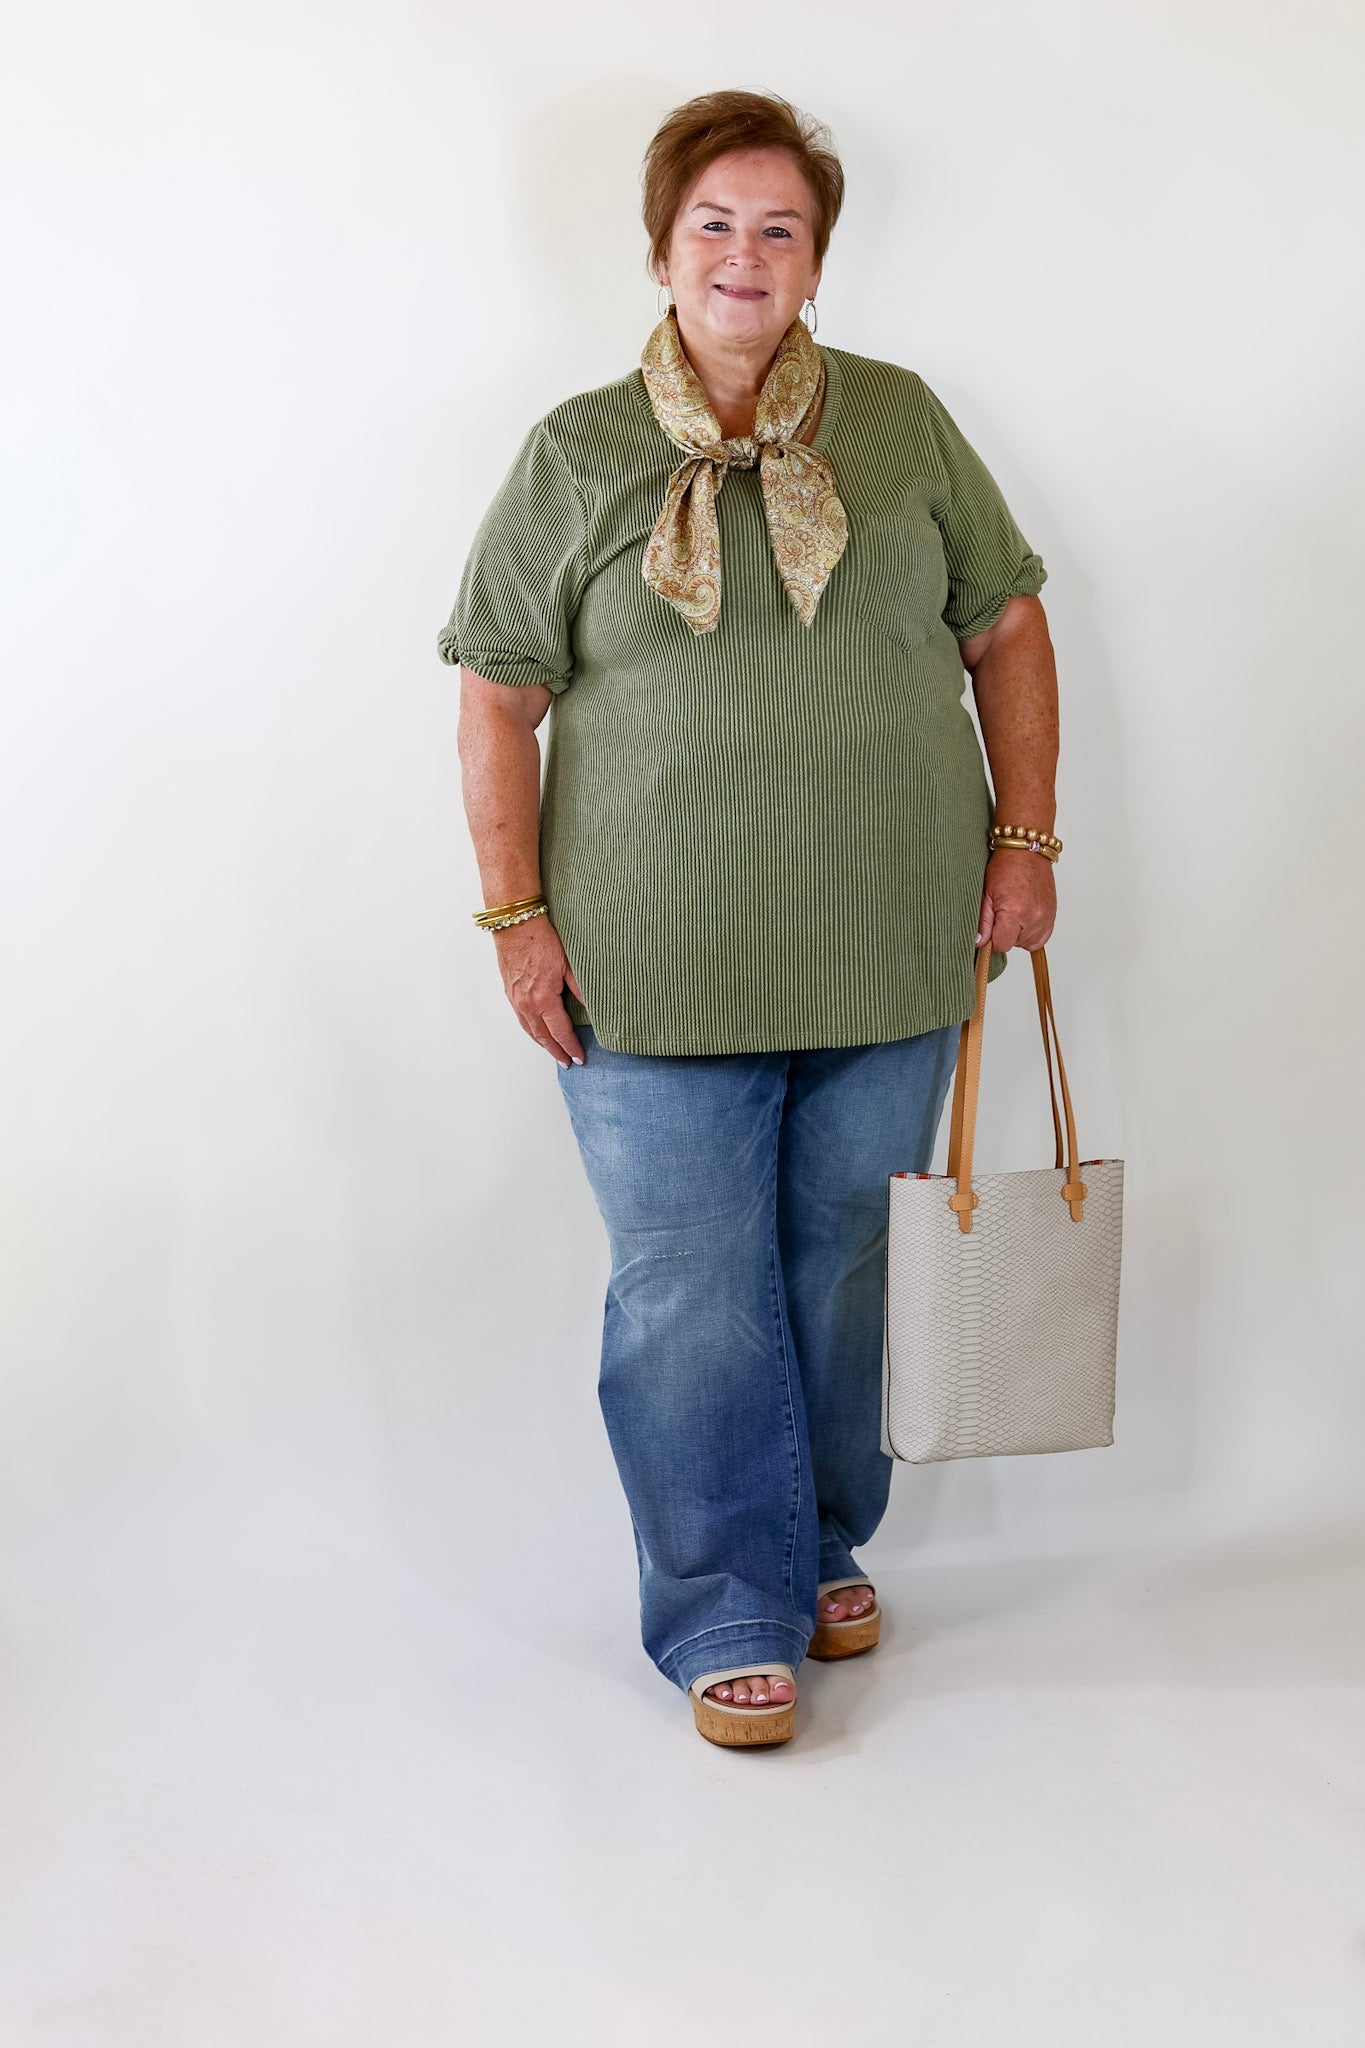 Only True Love Ribbed Short Sleeve Top with Front Pocket in Olive Green - Giddy Up Glamour Boutique